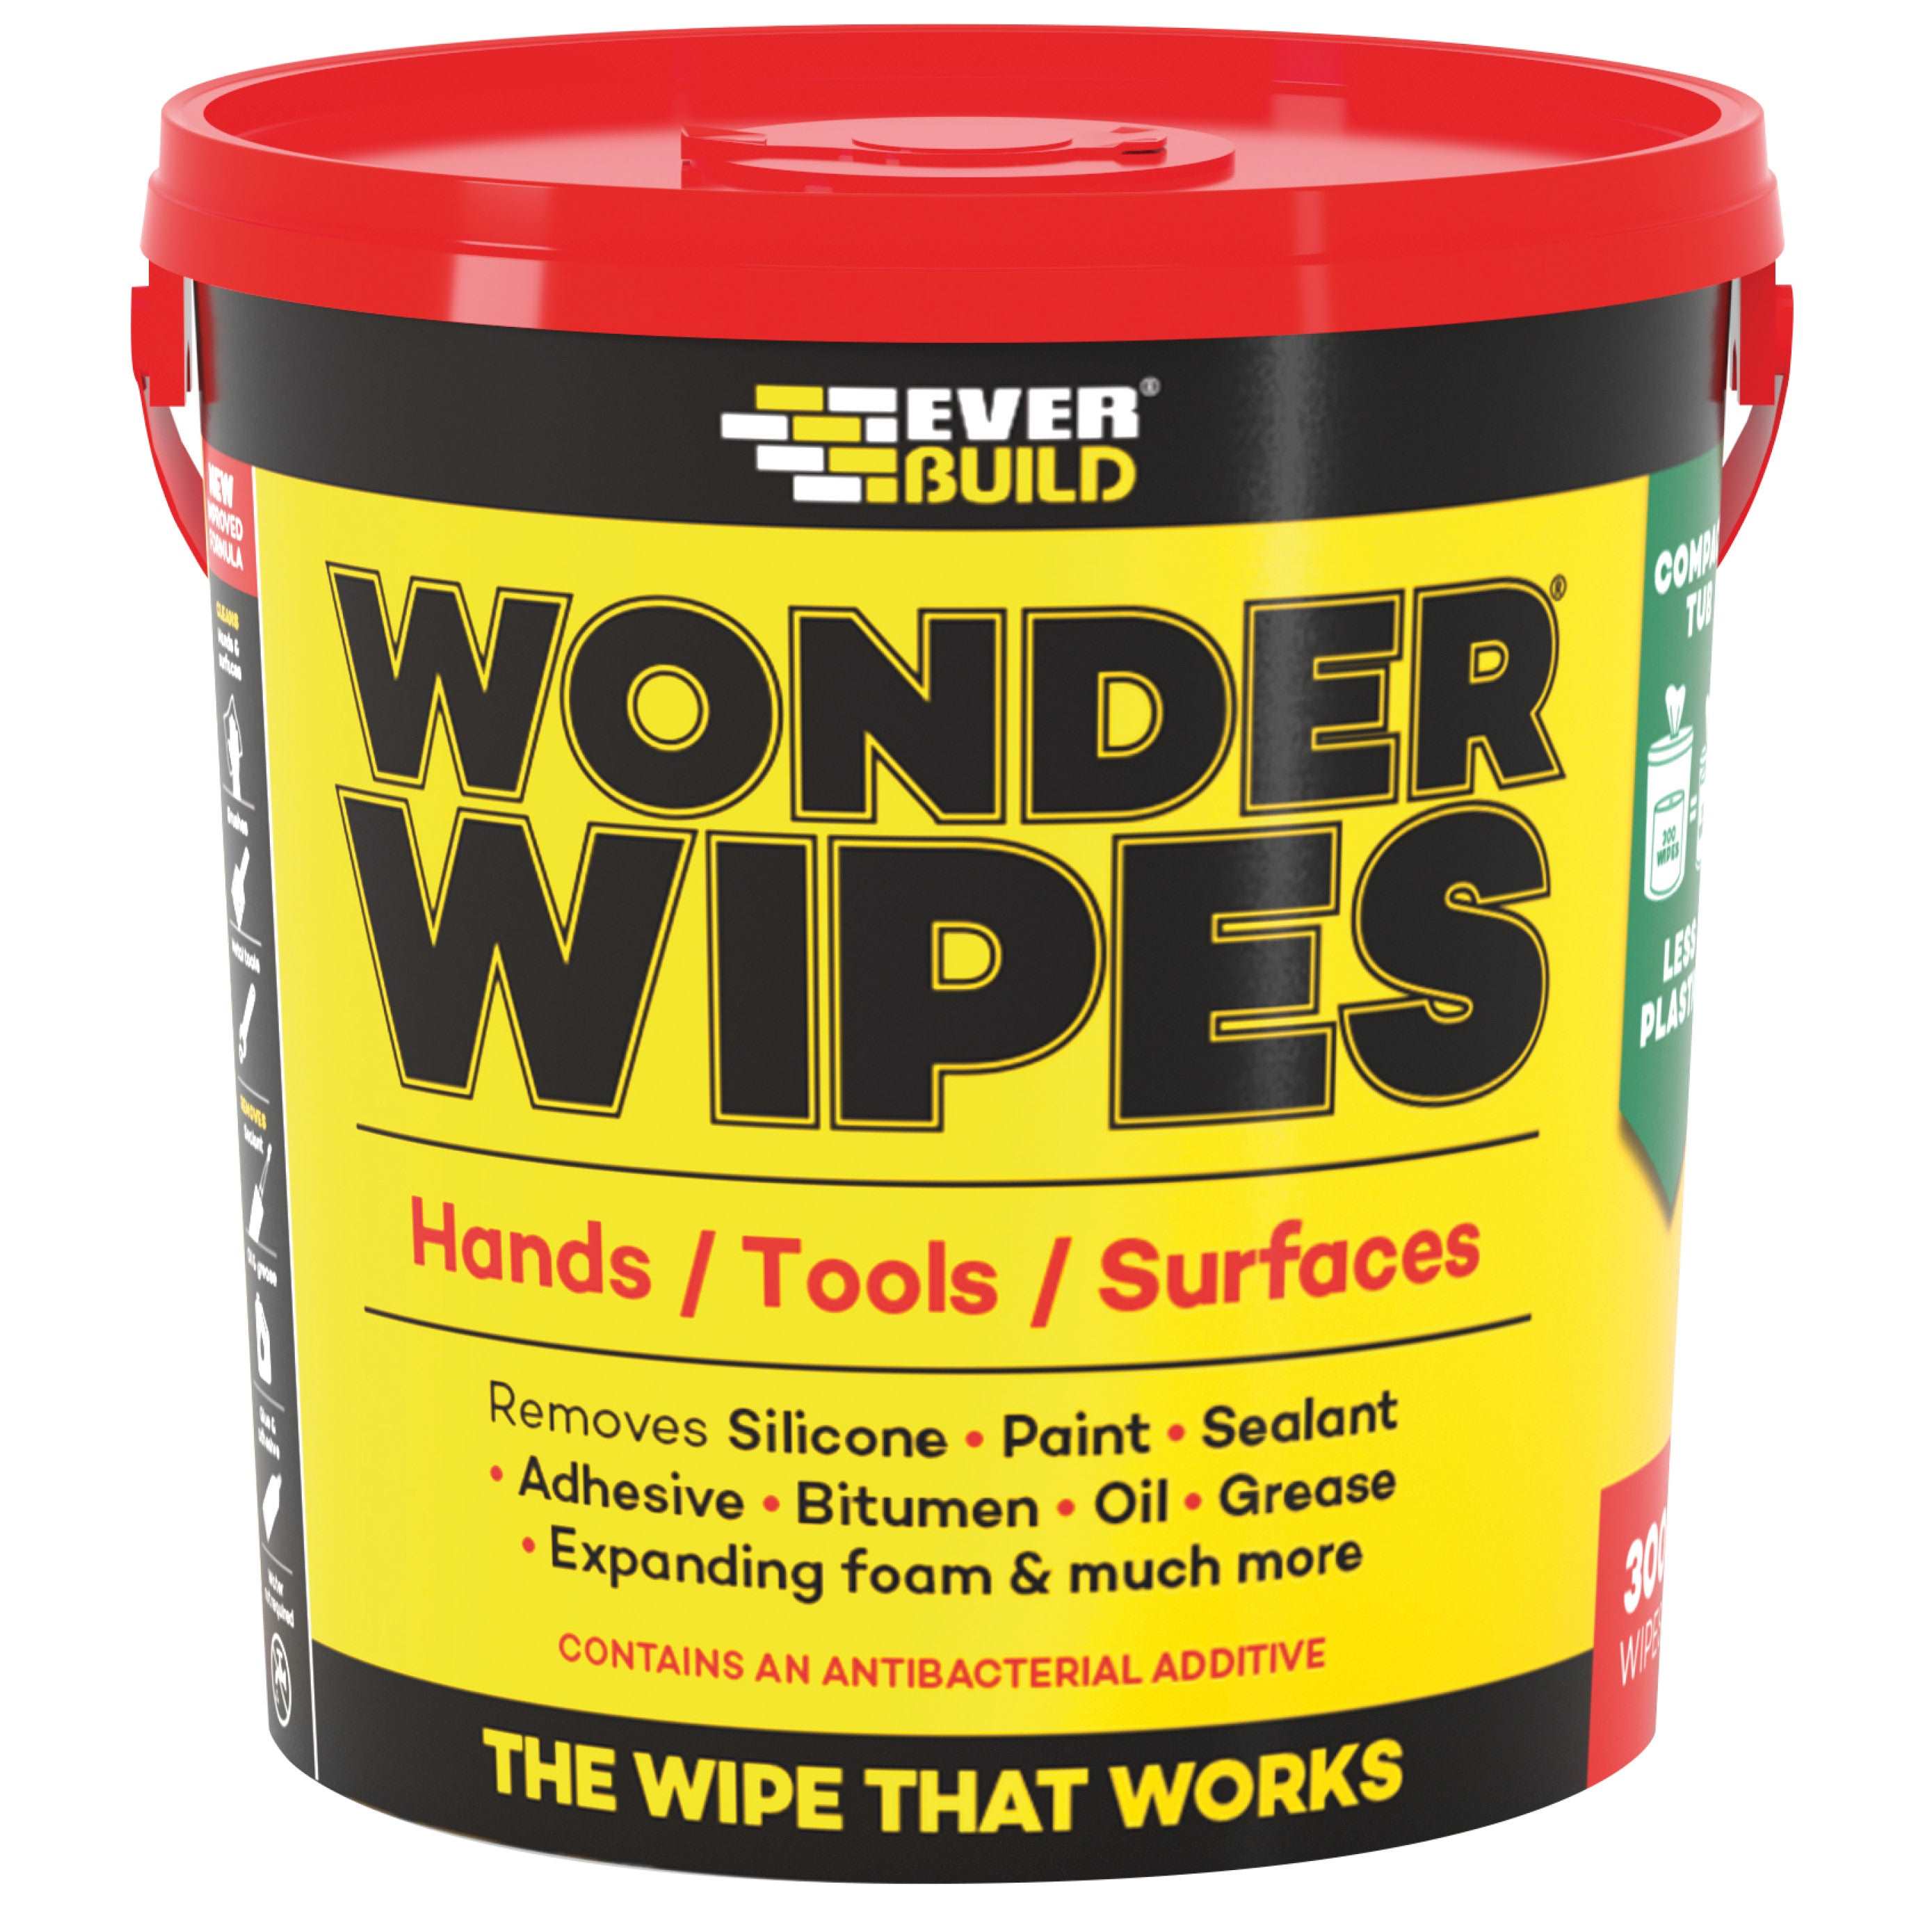 Everbuild Wonder Wipes Multi-Use Cleaning Wipes